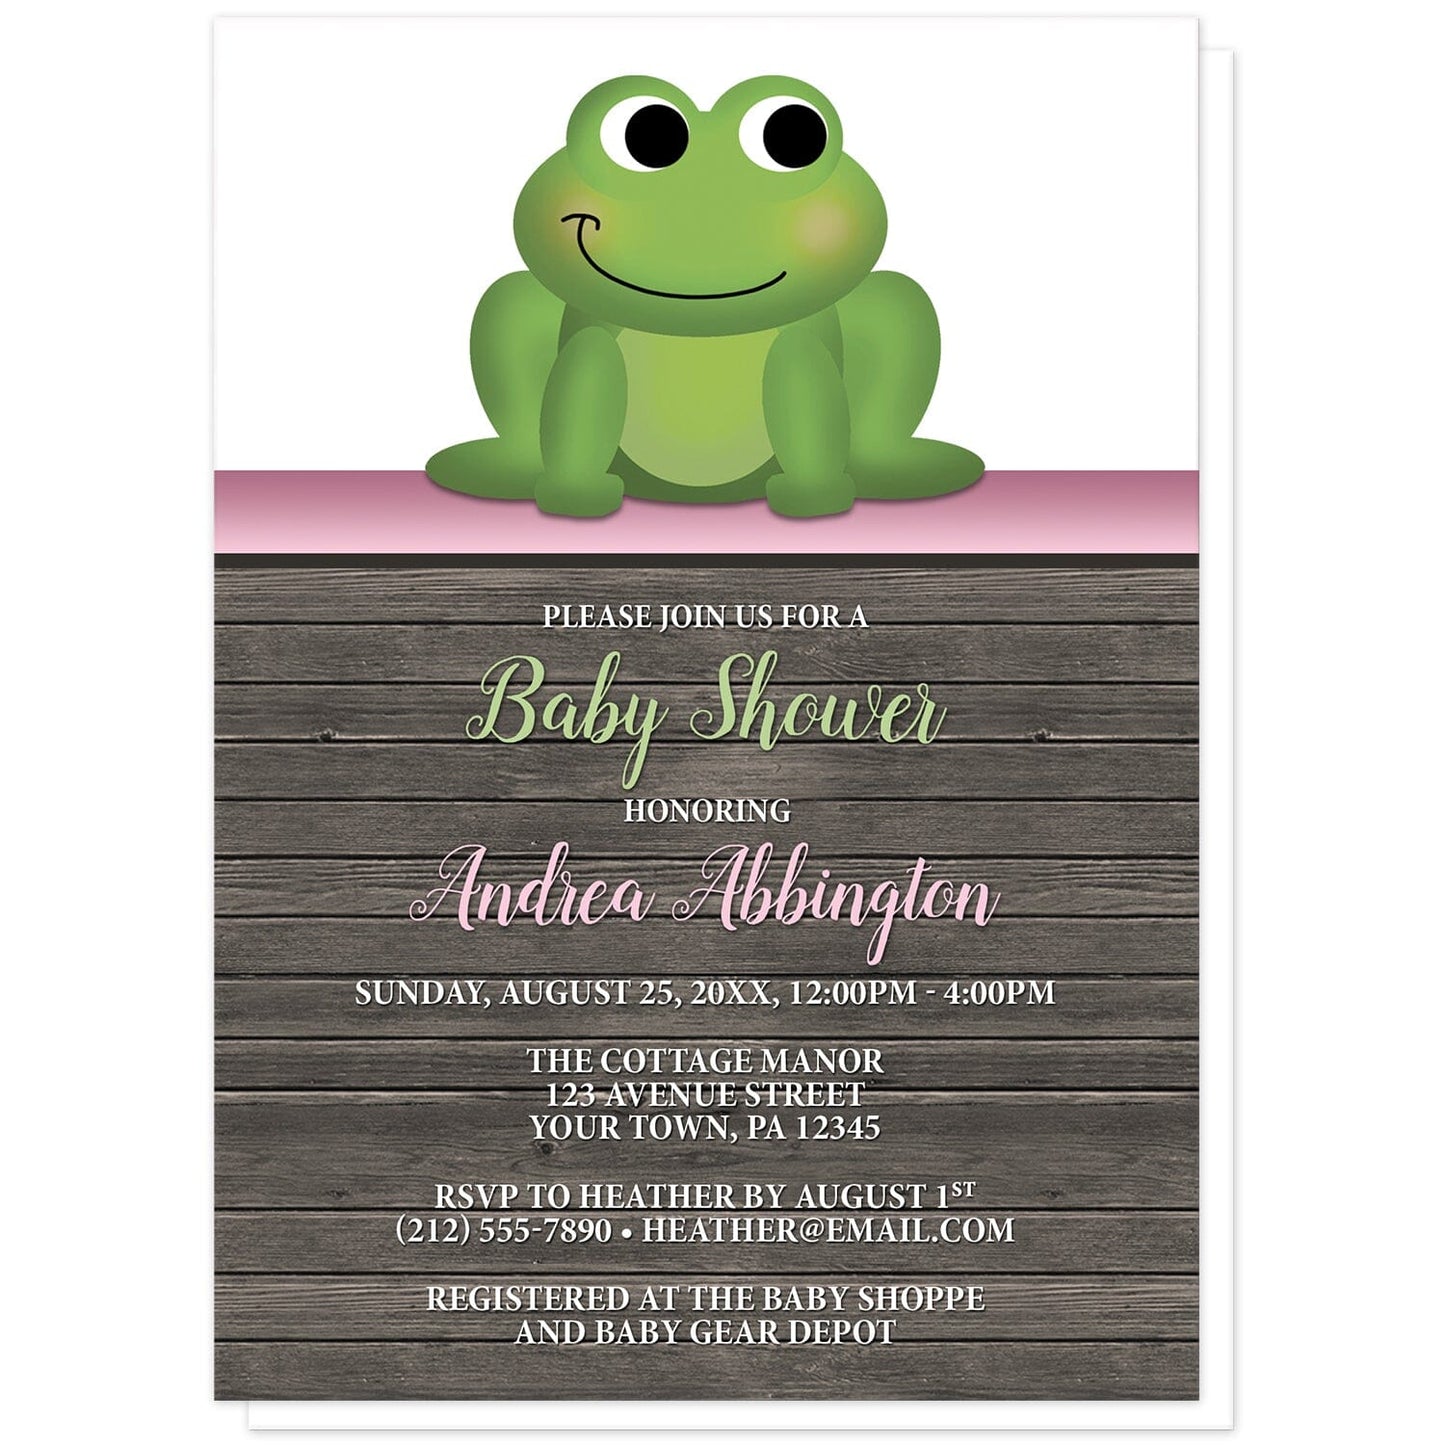 Cute Frog Green Pink Rustic Wood Baby Shower Invitations